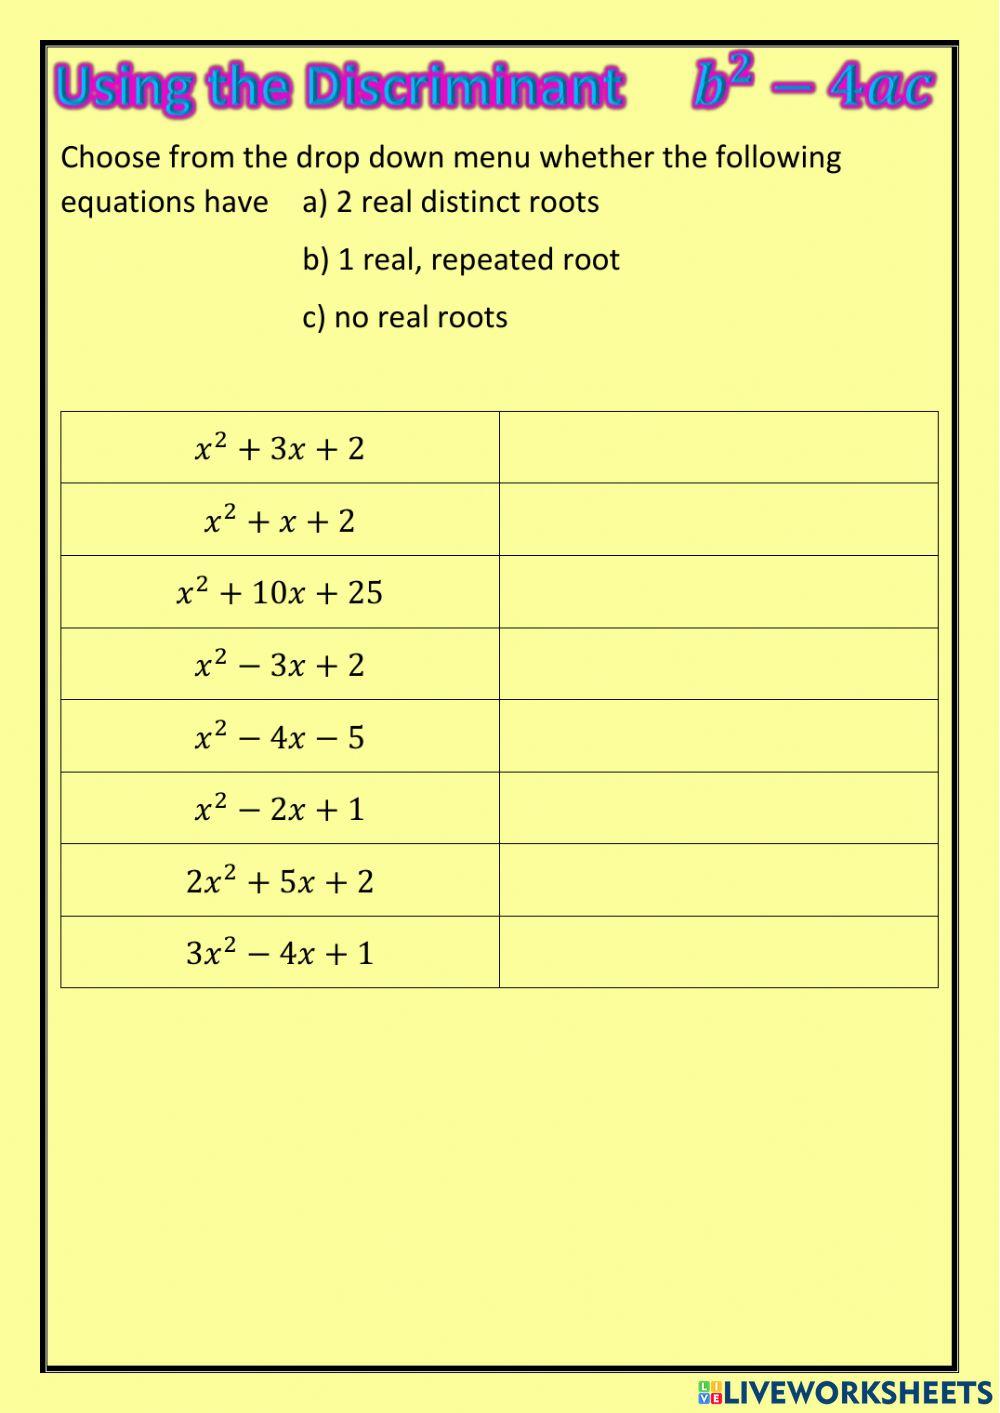 National 5 - Using the Discriminant